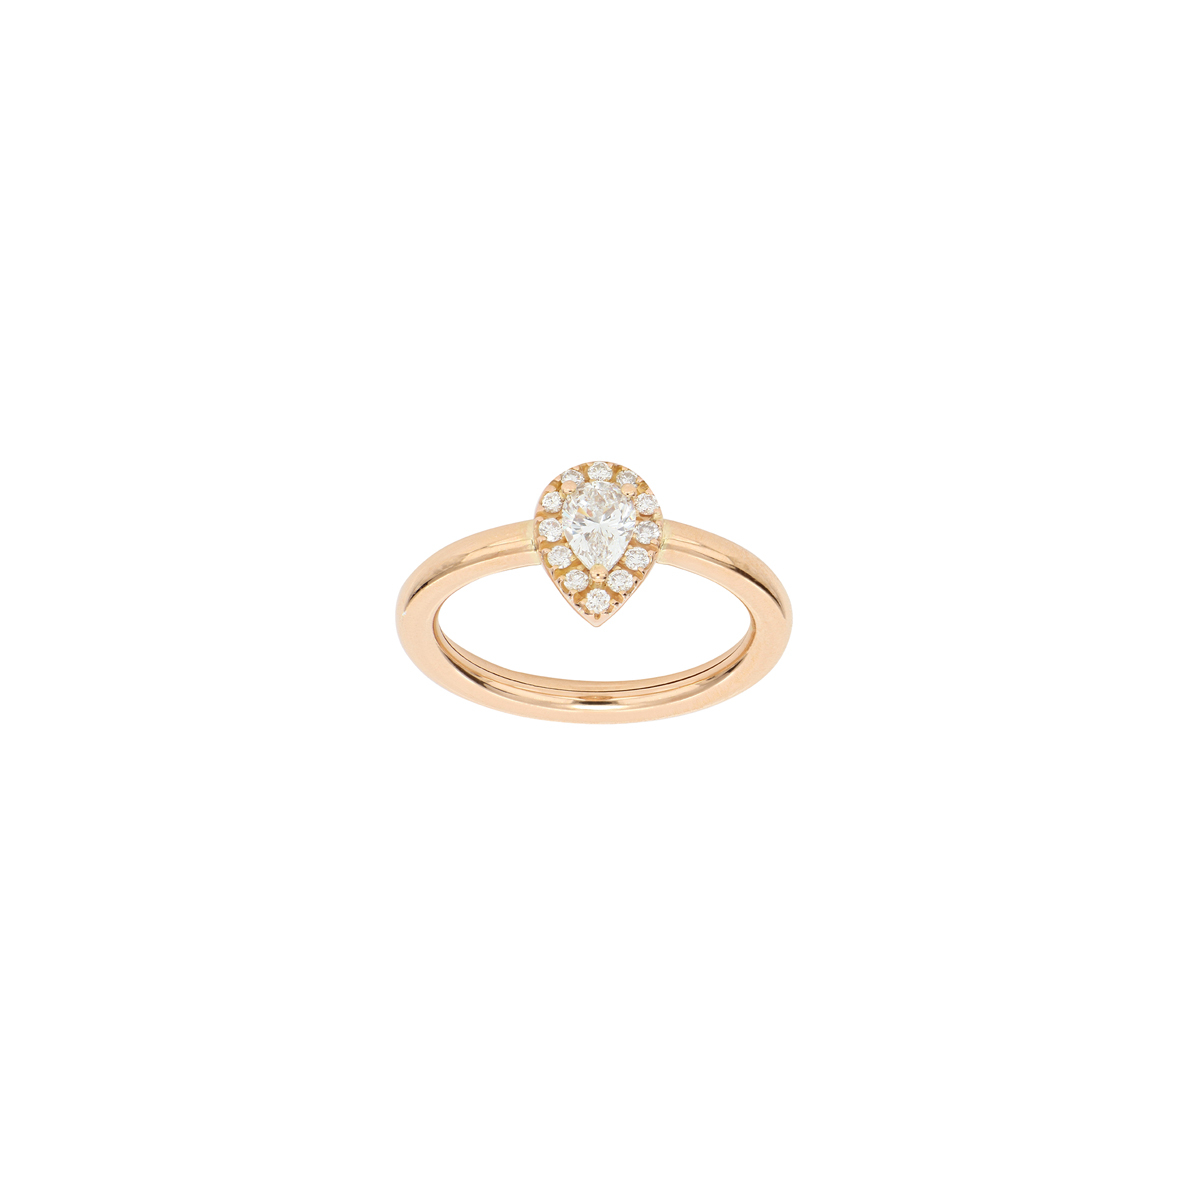 Red Gold Pear-Cut Diamond Halo Ring 